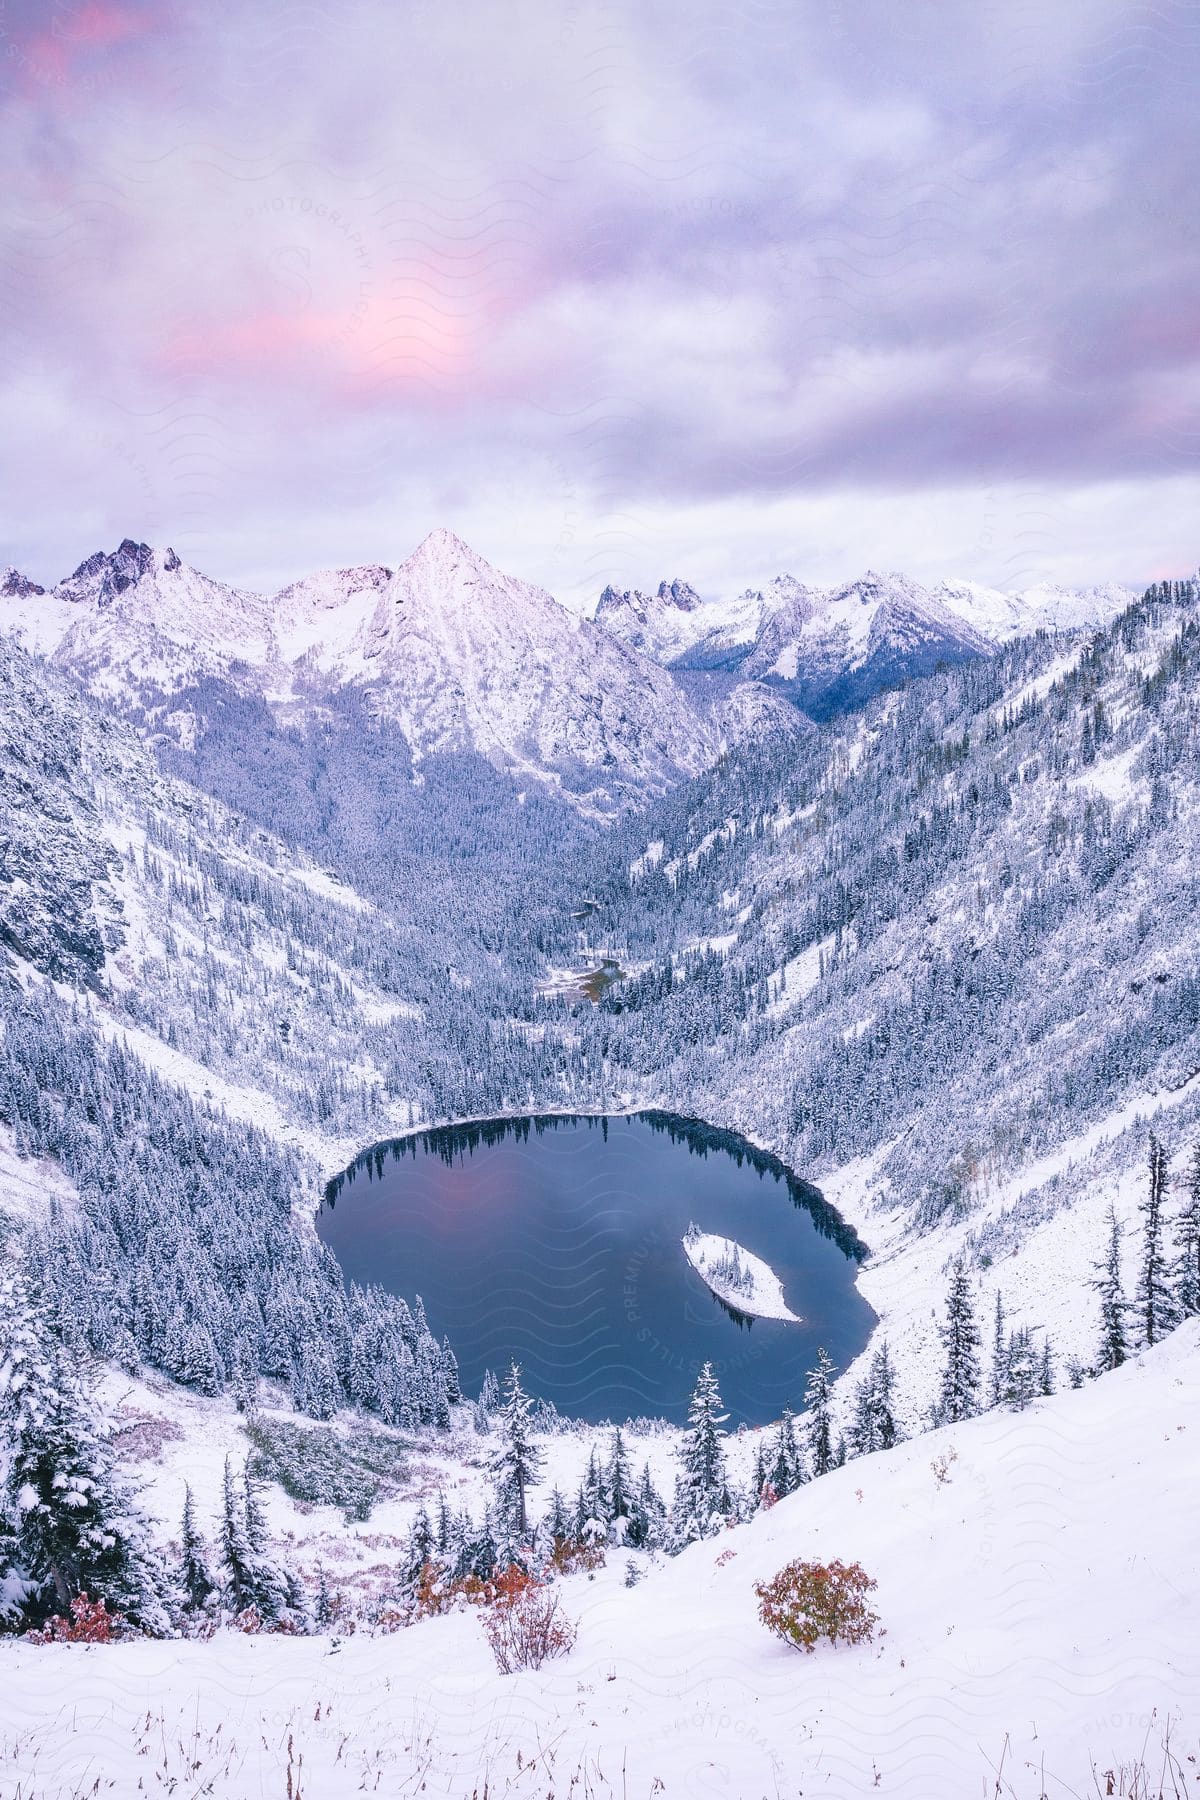 A lake in the center of a snowy mountain range.